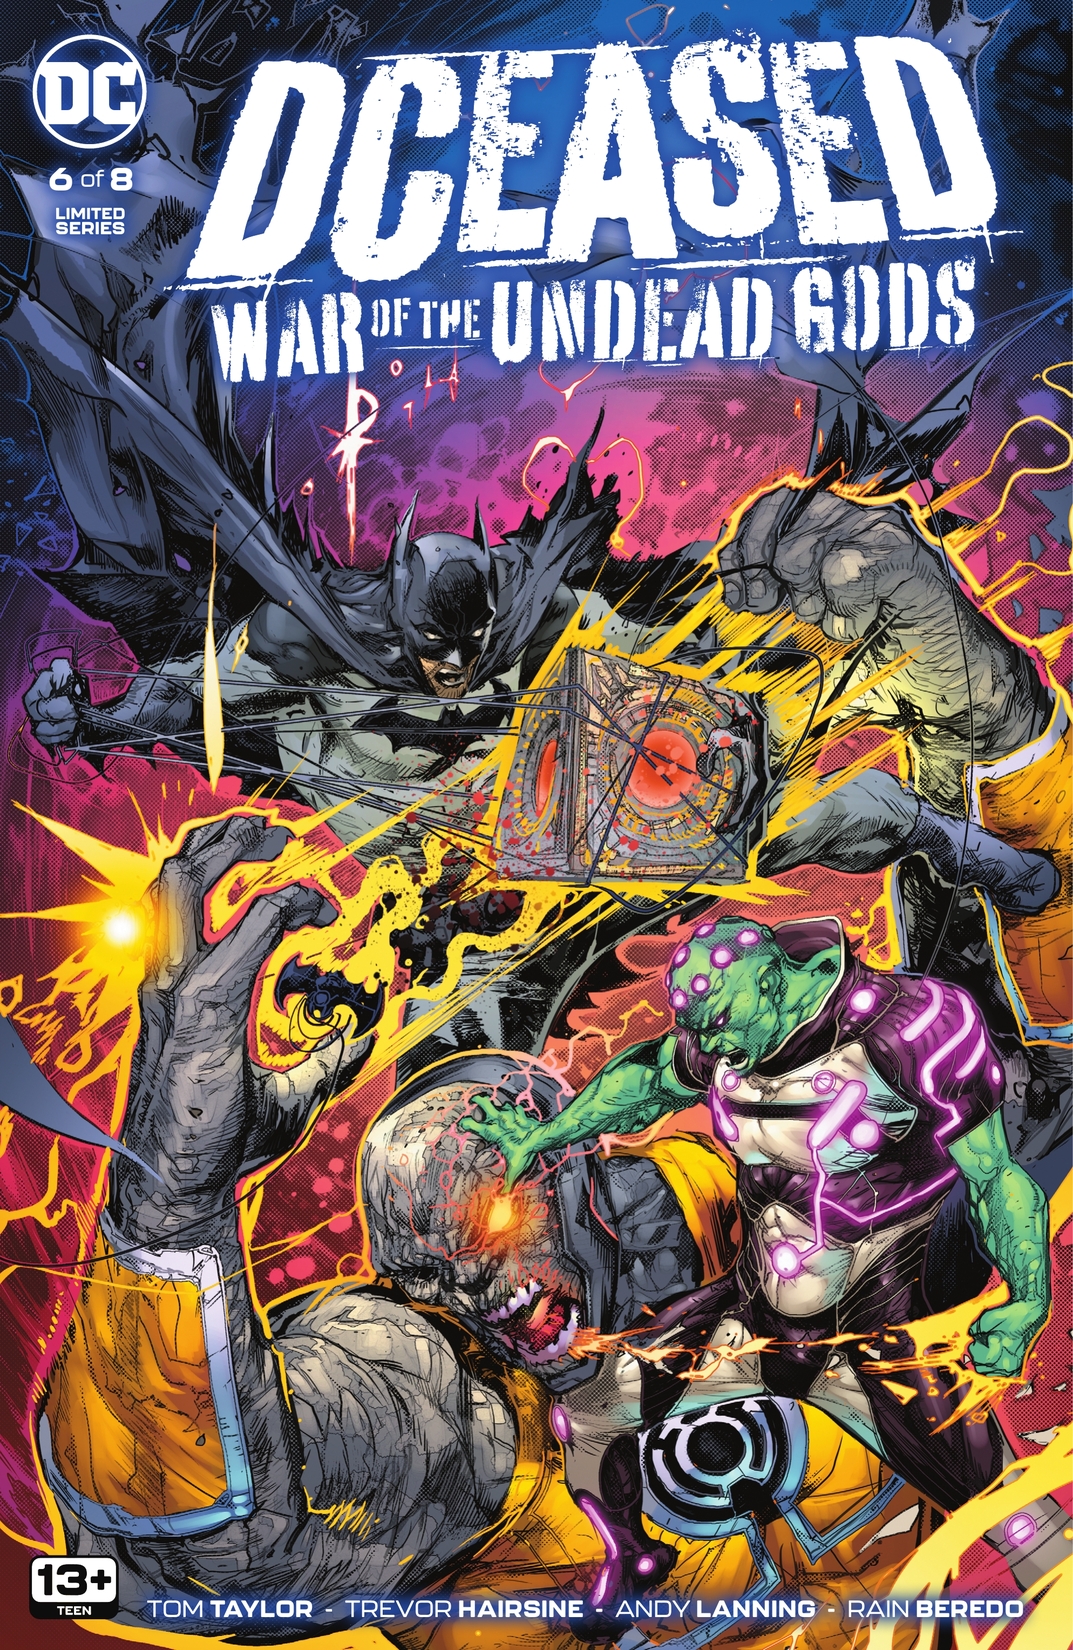 DCeased: War of the Undead Gods #6 preview images